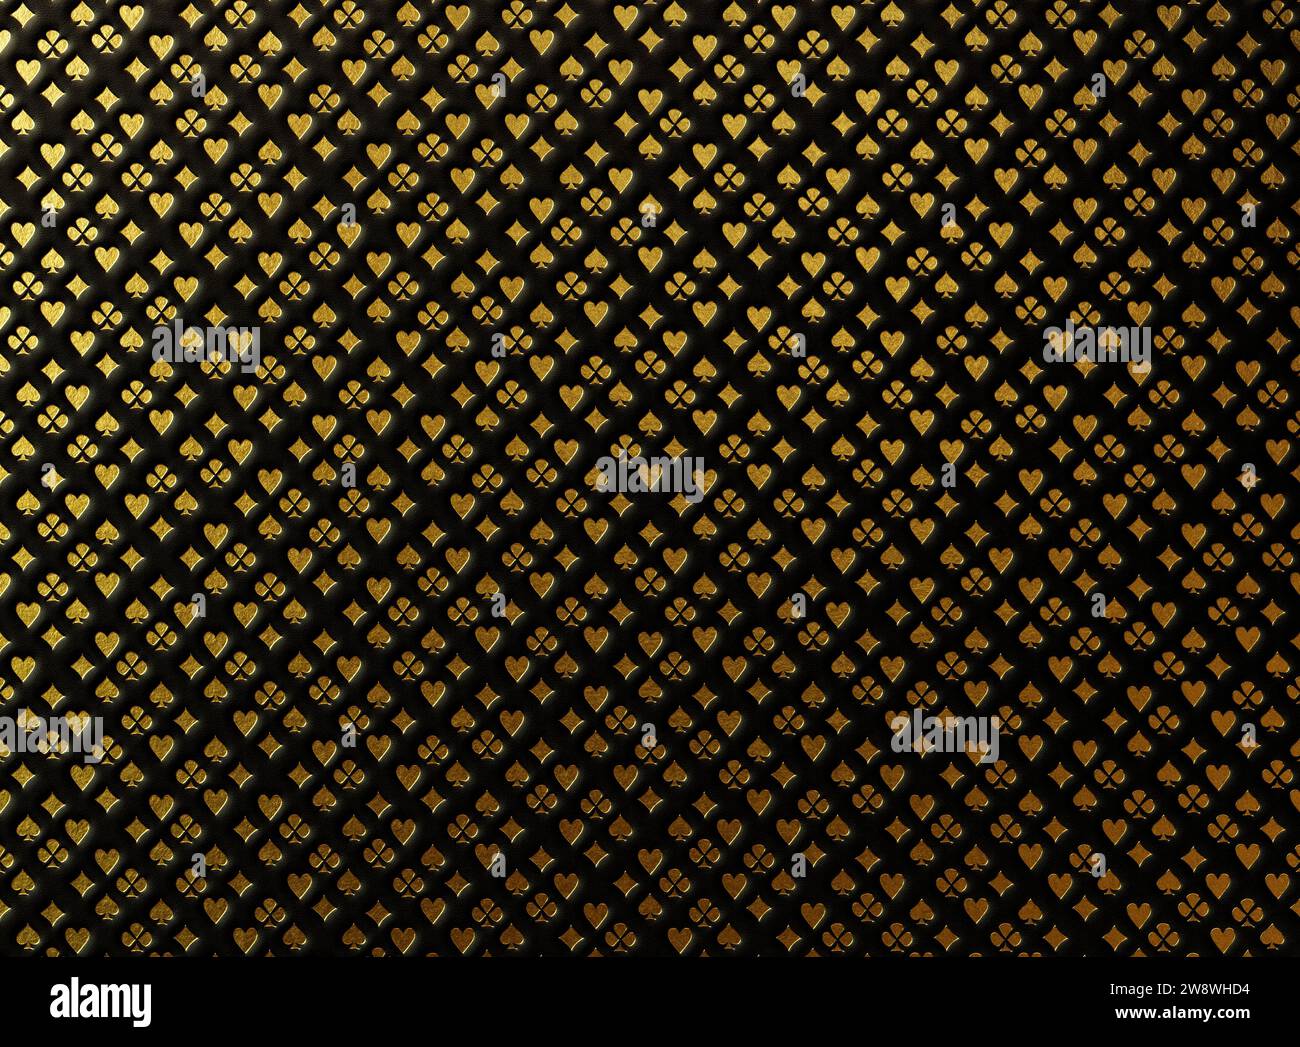 A black leather surface embossed with an array of gold casino card heart, diamond, spade, and club - 3D render Stock Photo